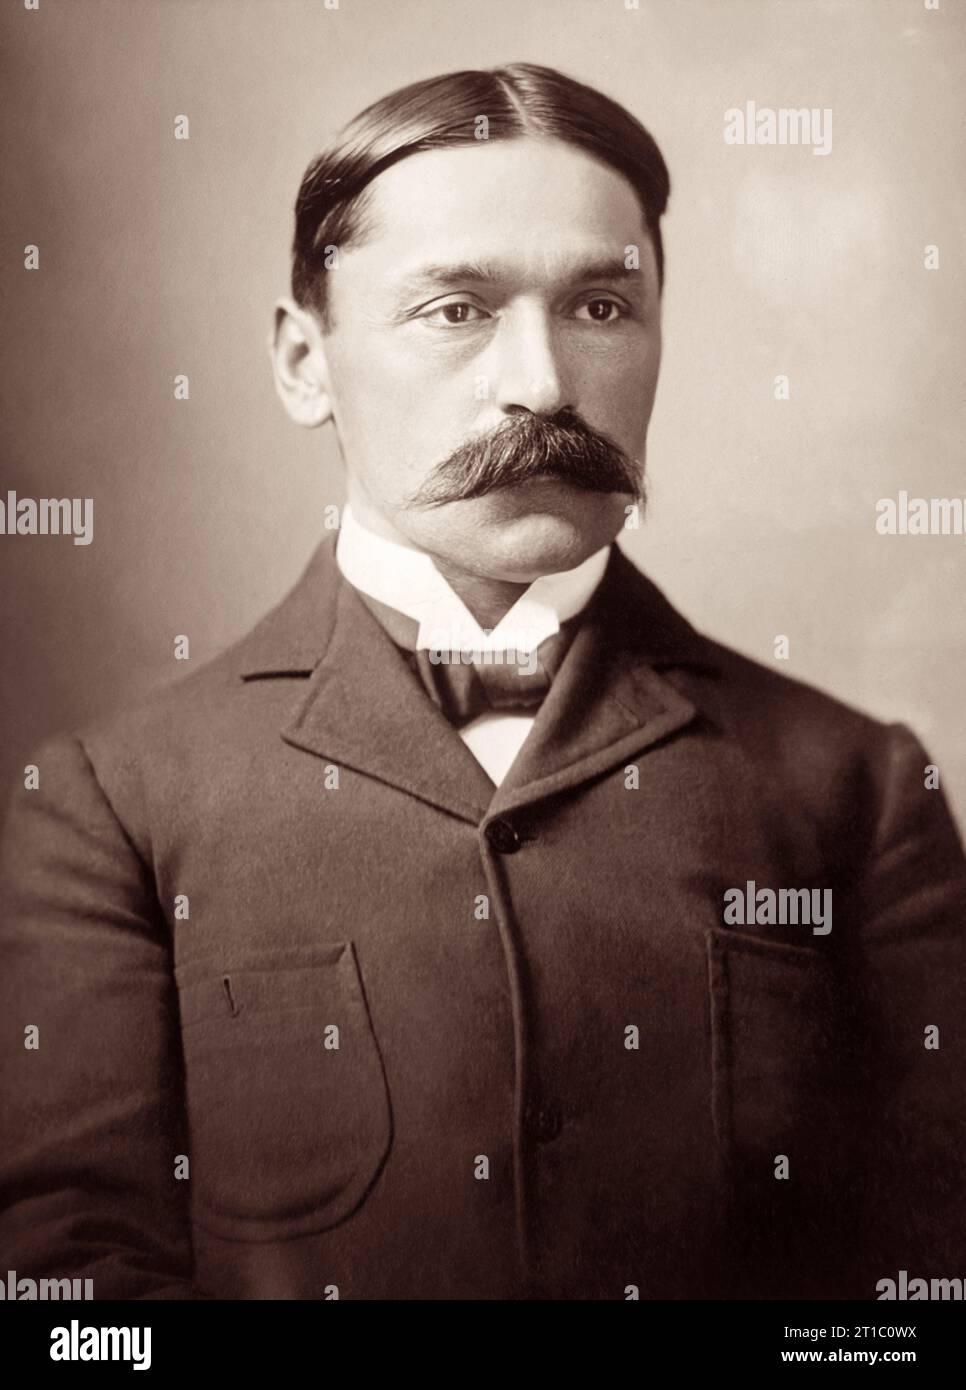 Serbian scientist Mihaljo Idvorski Pupin (1858-1935) was a professor at Columbia University, a founding member of NACA (the predecessor of NASA), a philanthropist, and a scientific inventor holding numerous patents. Stock Photo